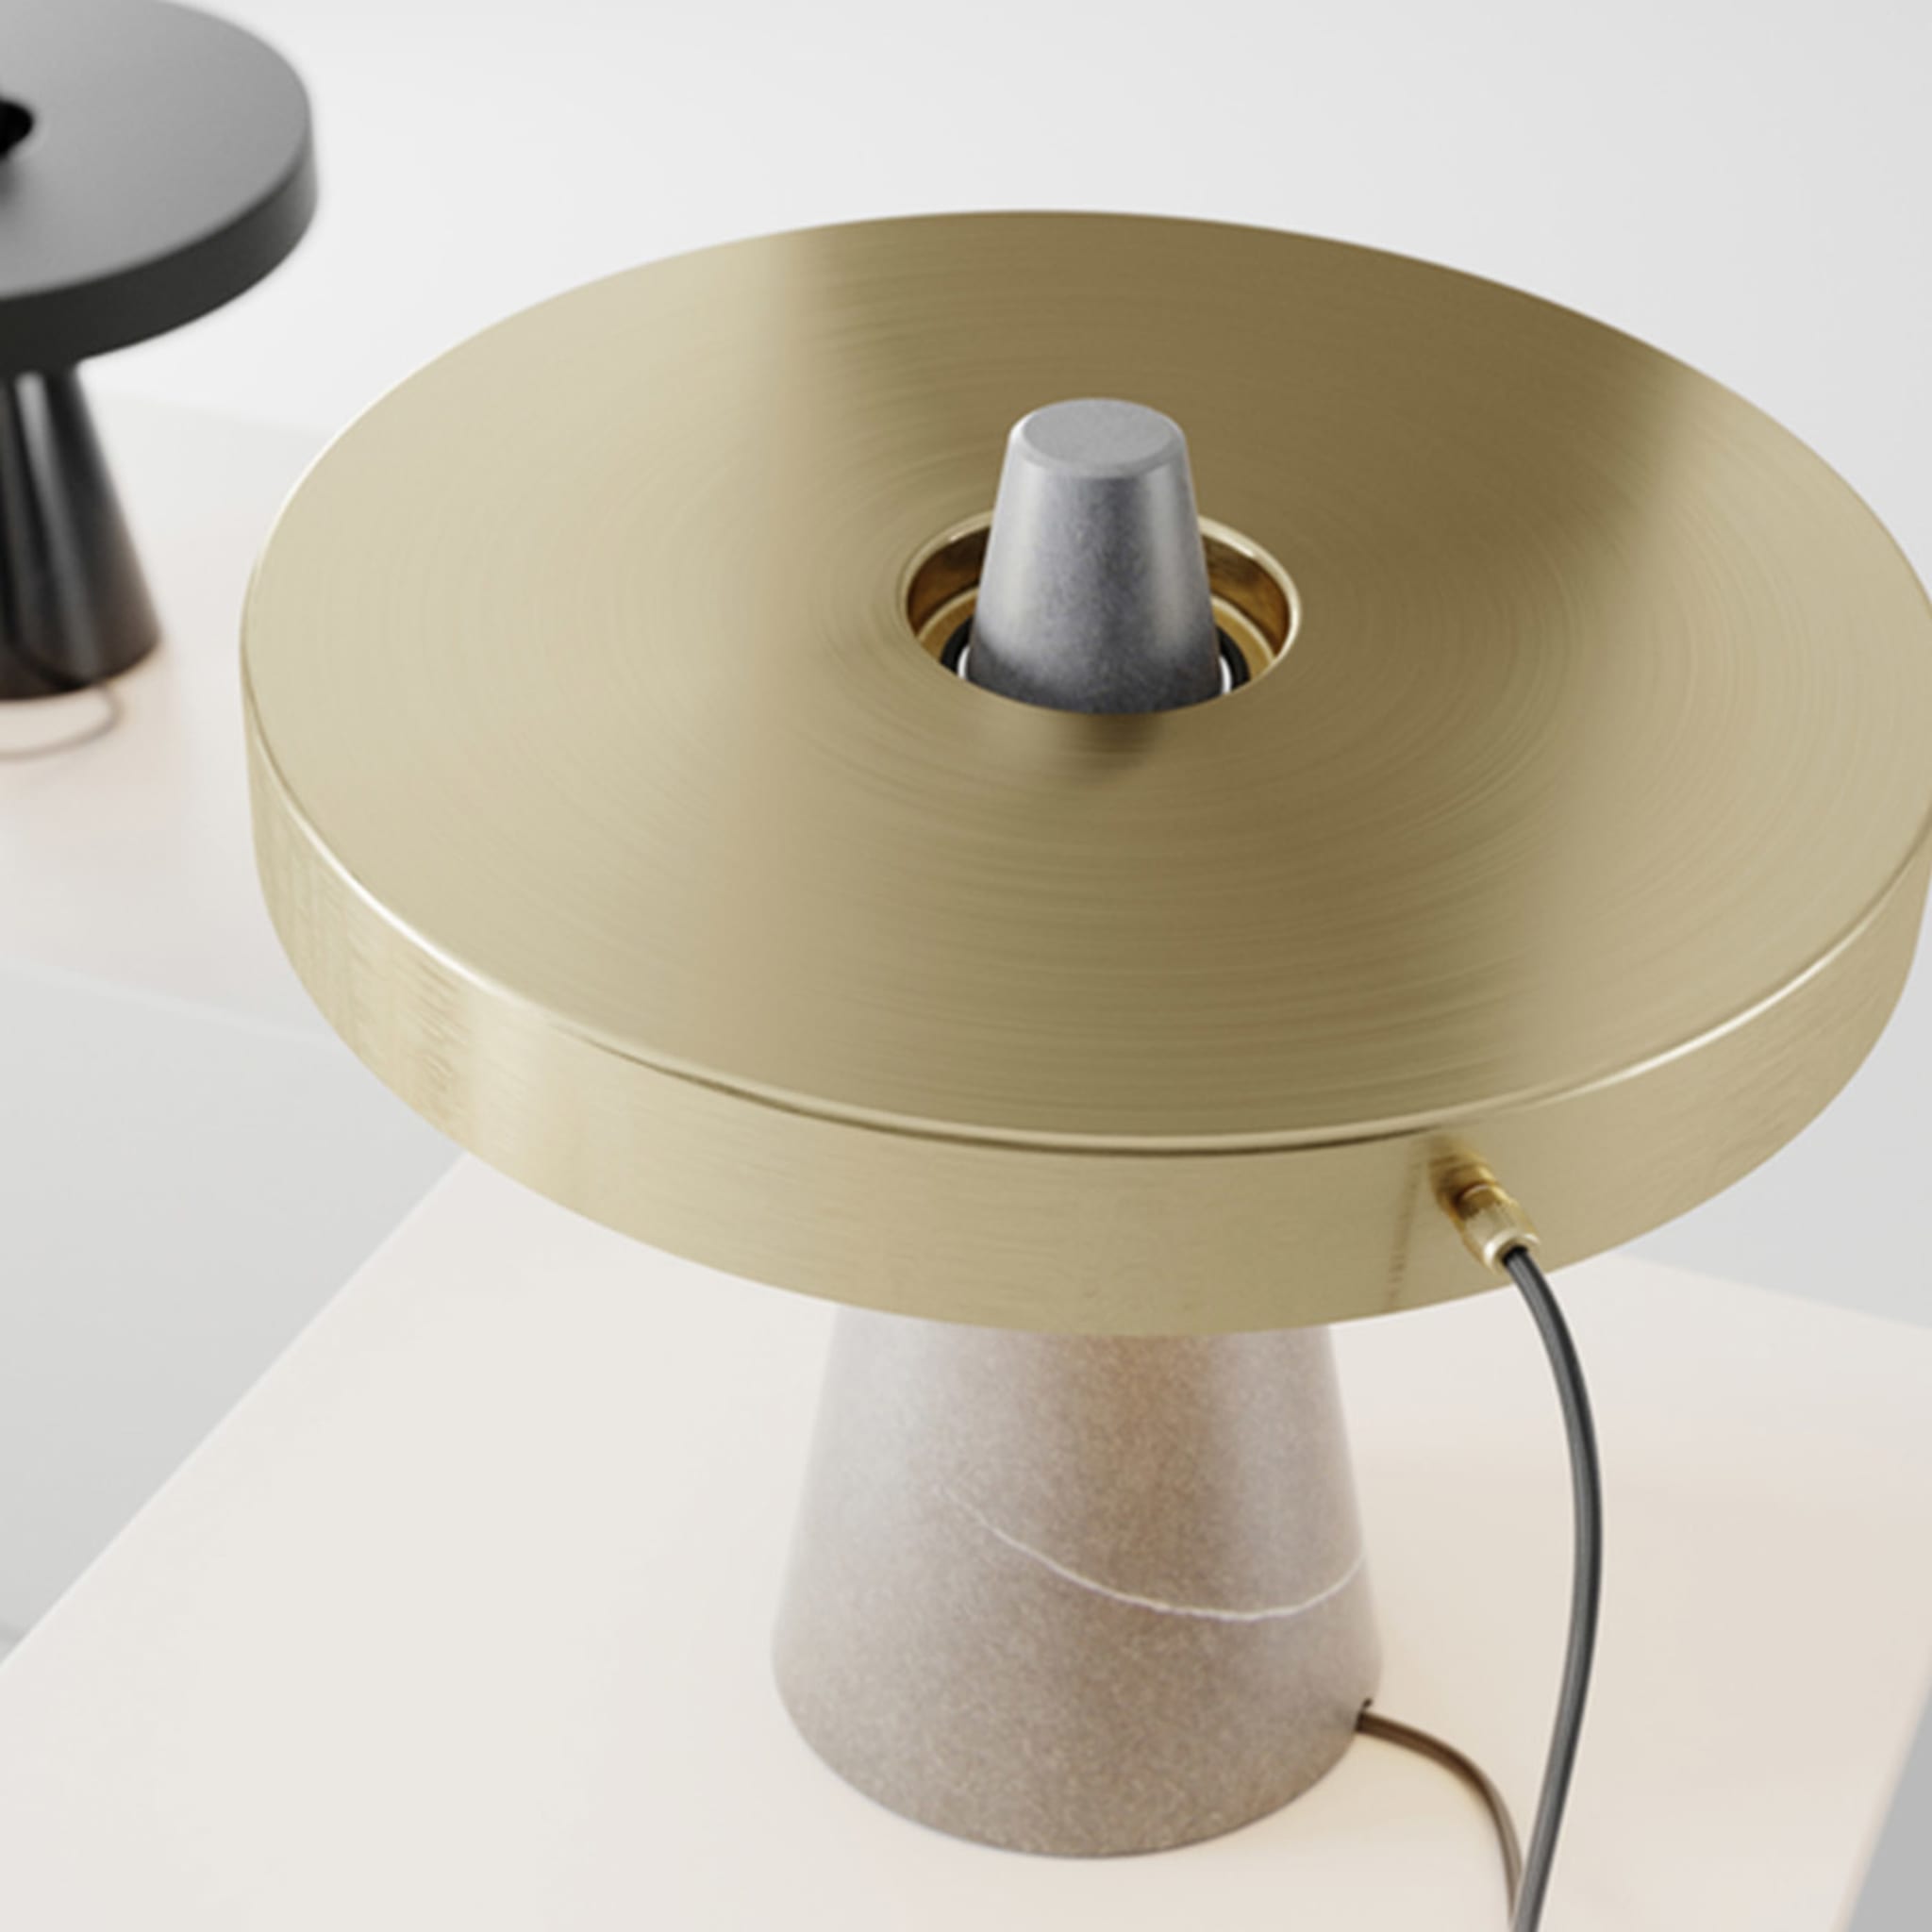 ED039 Grey Stone and Brass Table Lamp - Alternative view 3